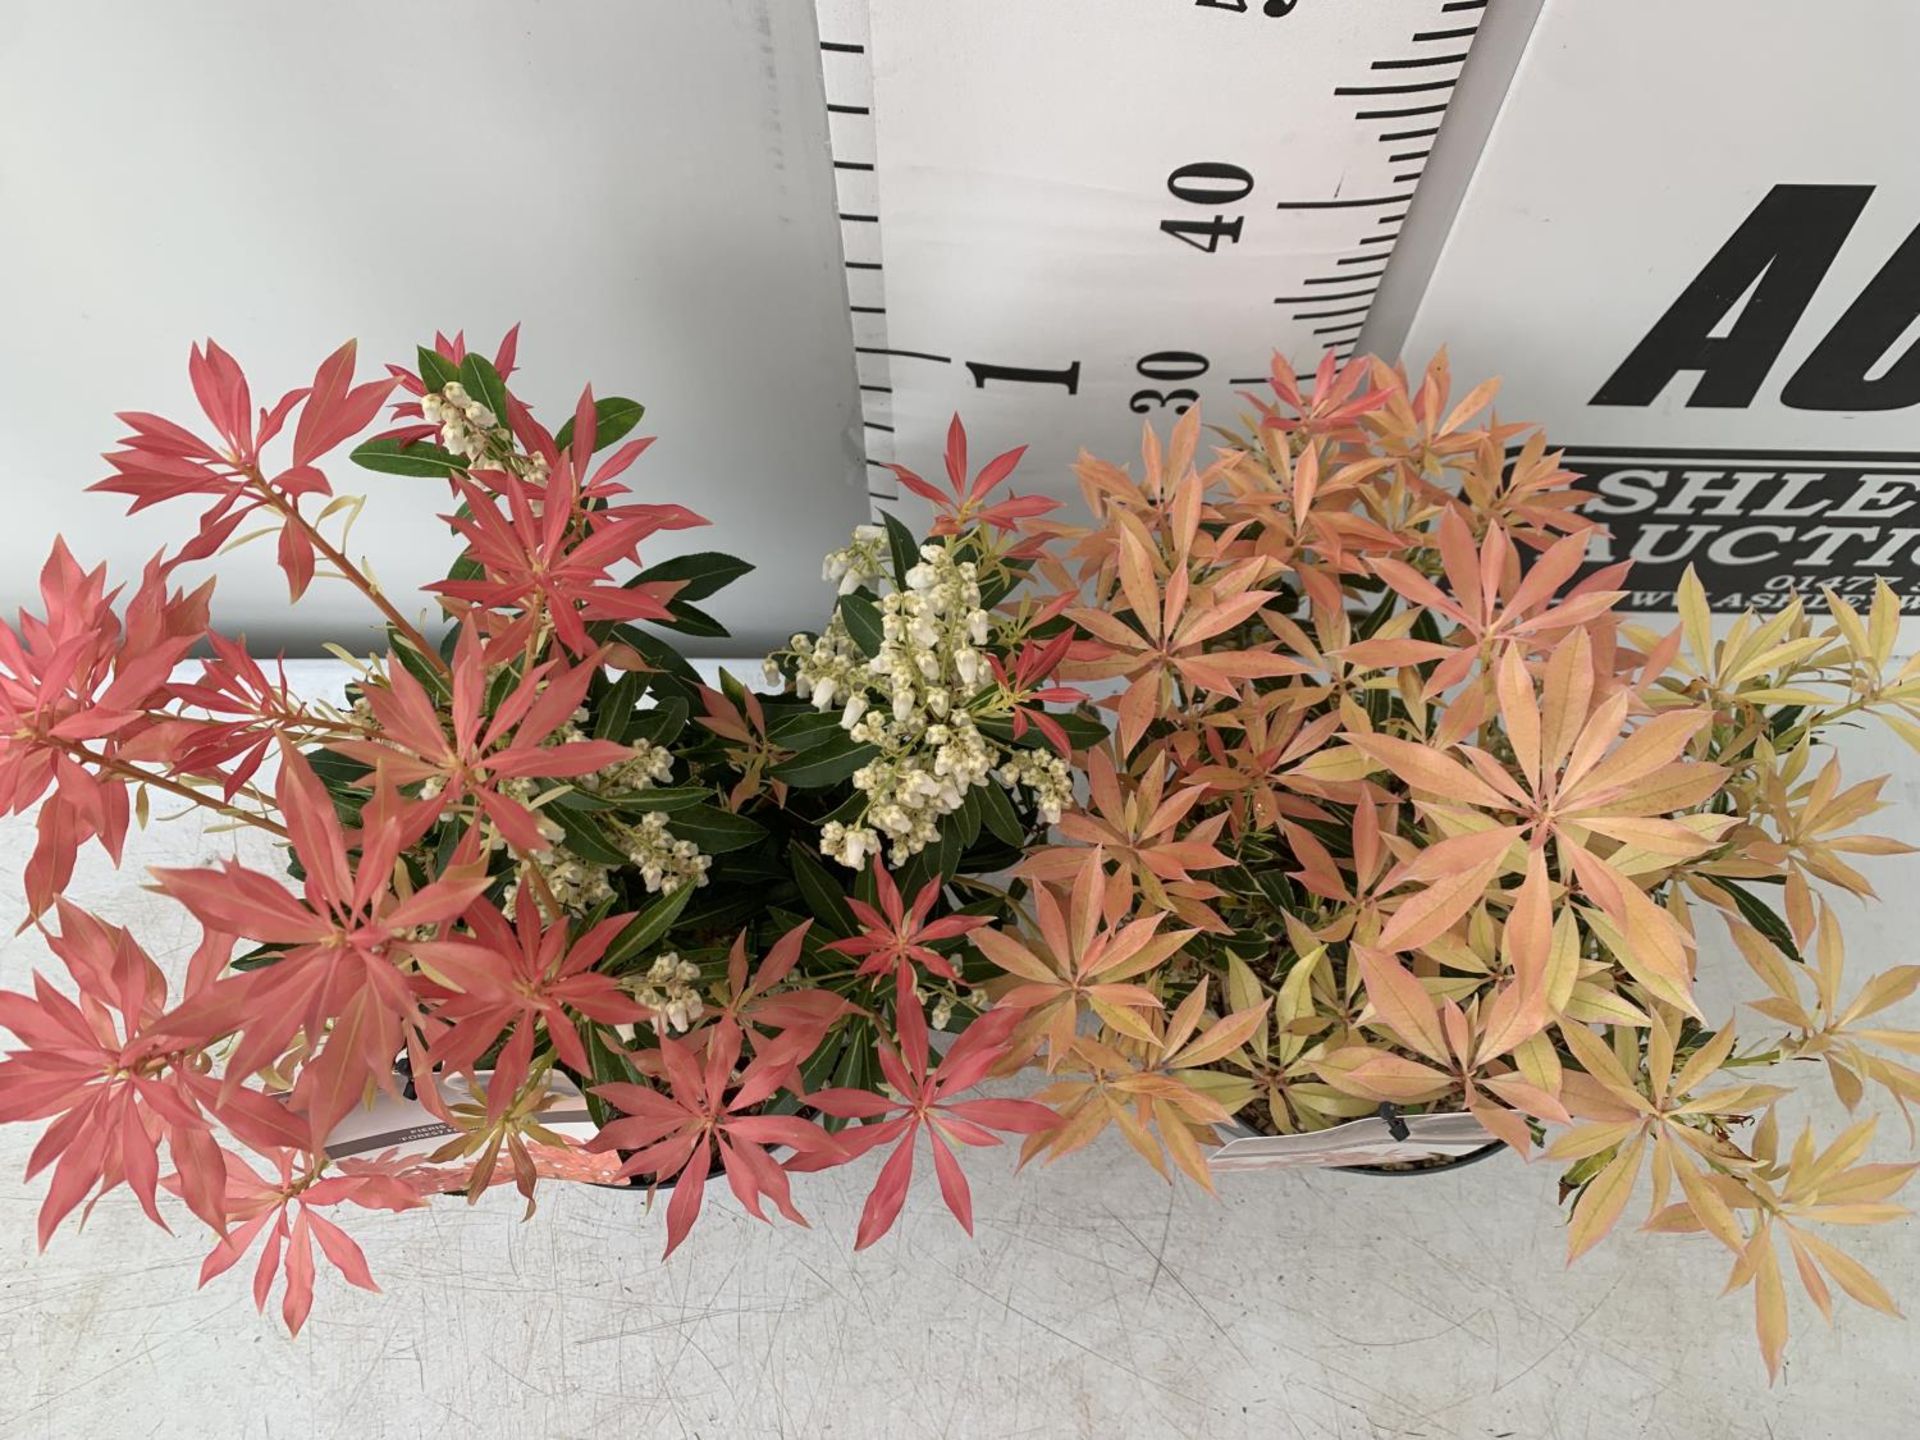 TWO PIERIS JAPONICA 'FLAMING SILVER' AND 'FOREST FLAME' IN 3 LTR POTS 45CM TALL PLUS VAT TO BE - Image 2 of 6